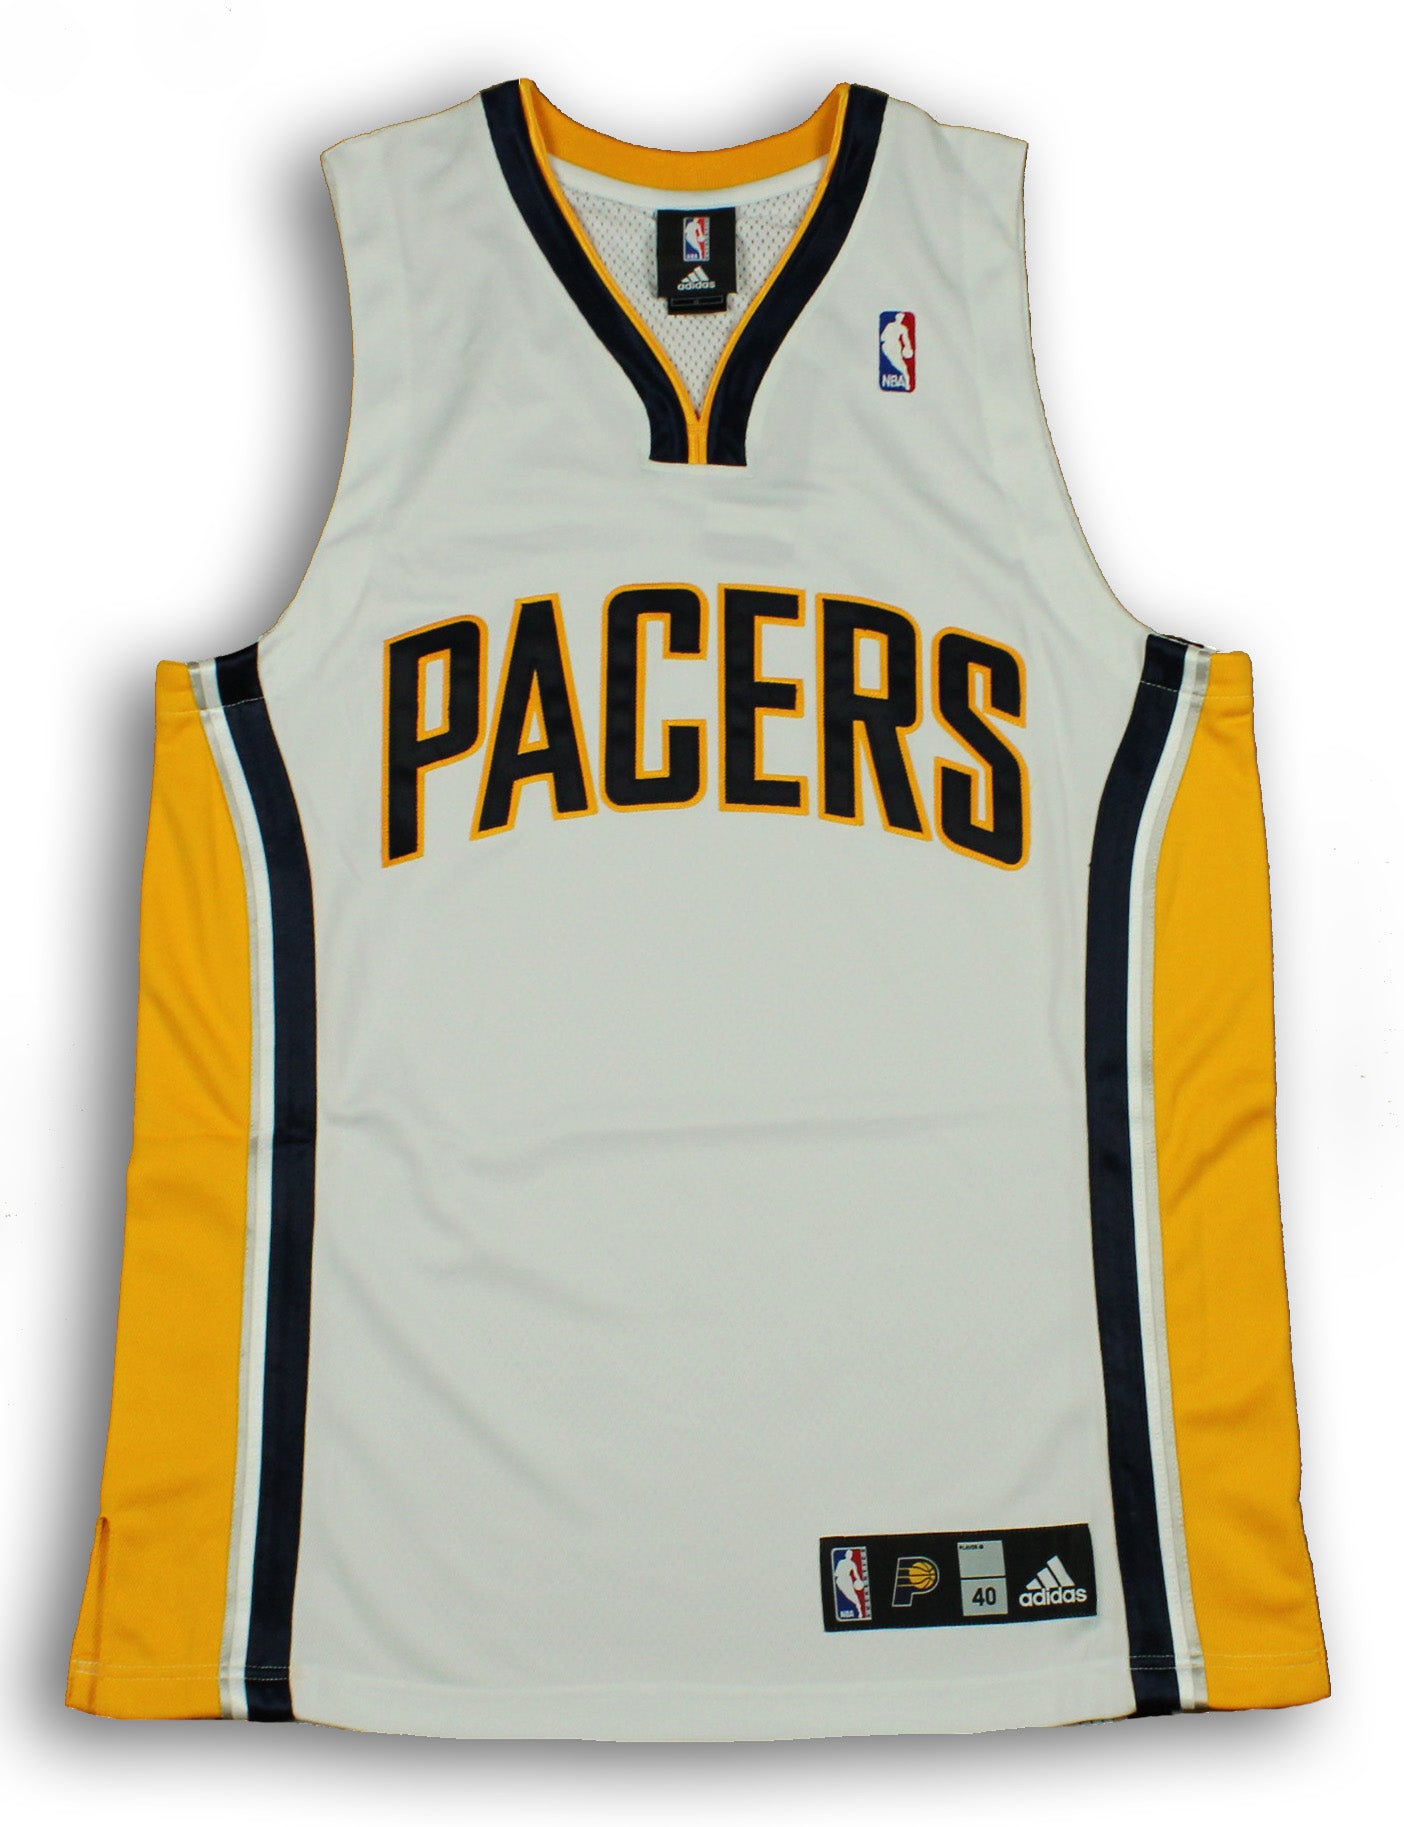 2002-03 Indiana Pacers Blank Game Issued White Jersey 56 DP20107